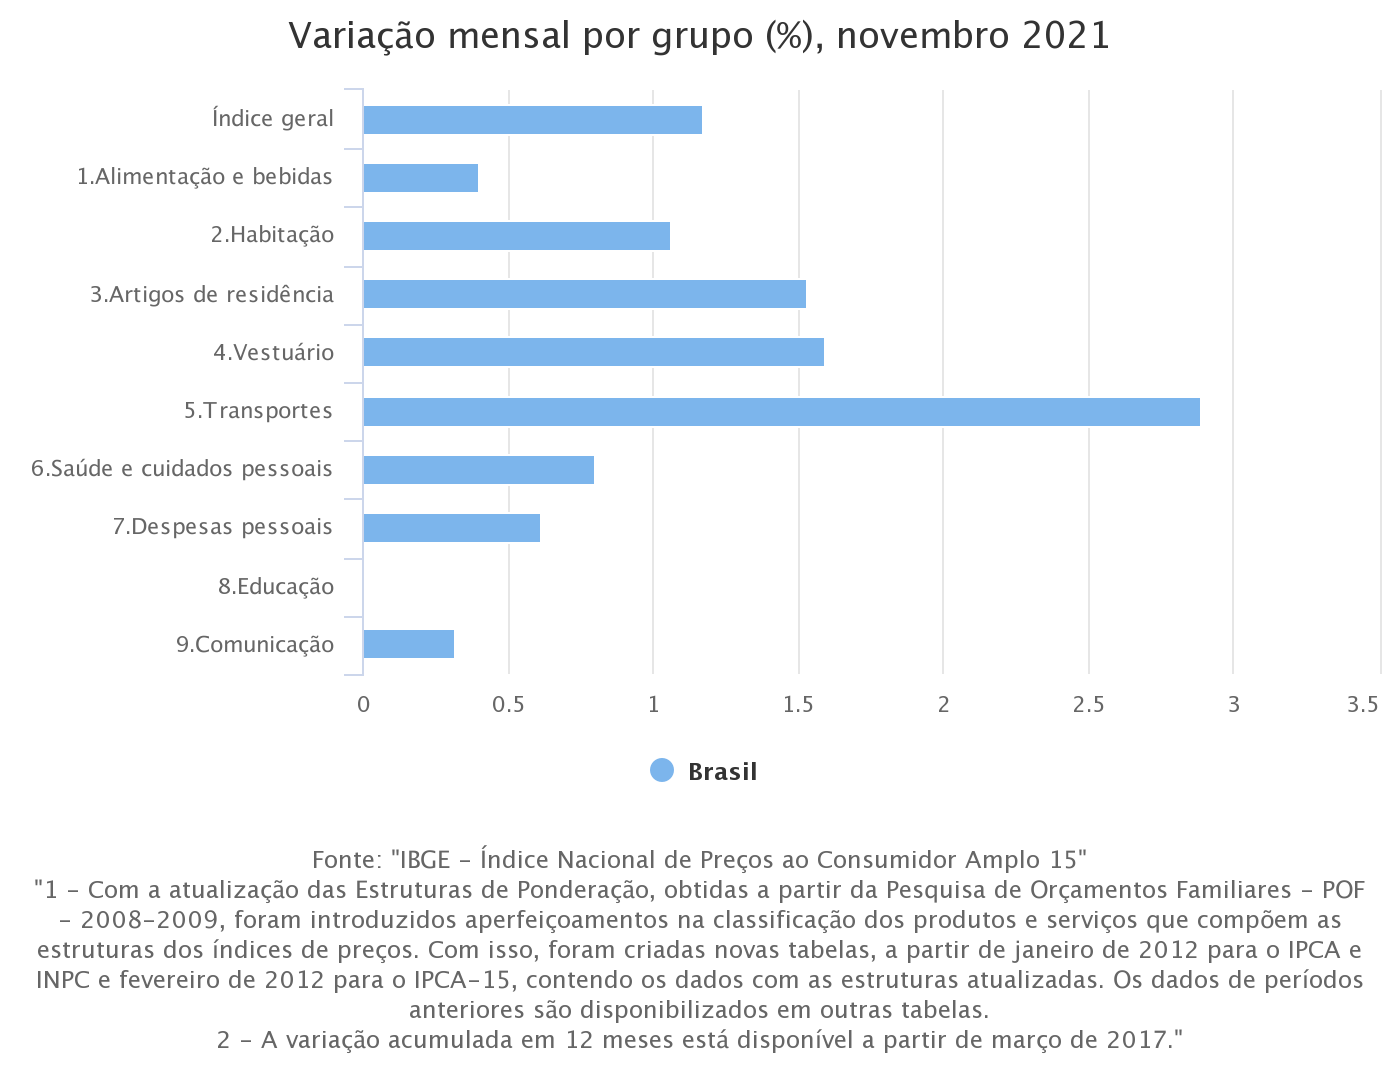 Variation by groups of IPCA-15 in November 2021.